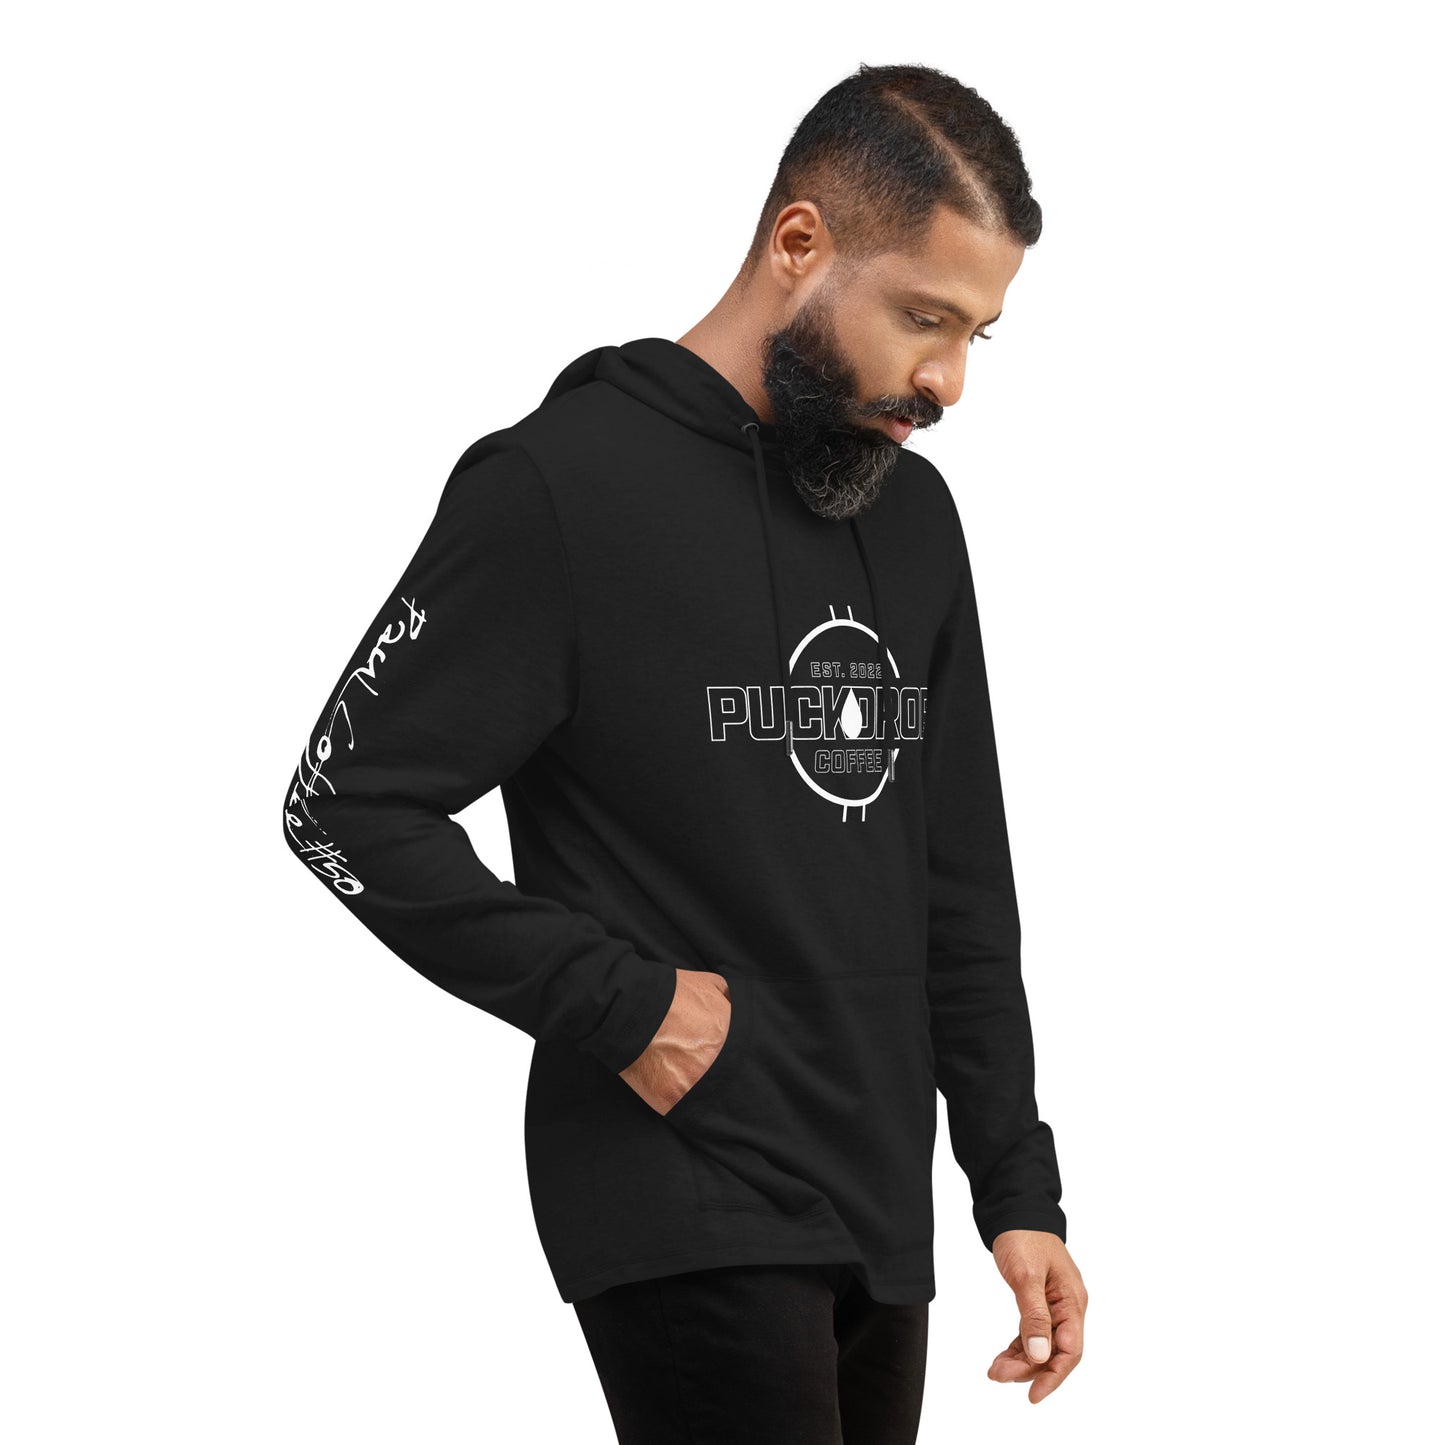 PUCKDROP Black French Terry Unisex Lightweight Hoodie